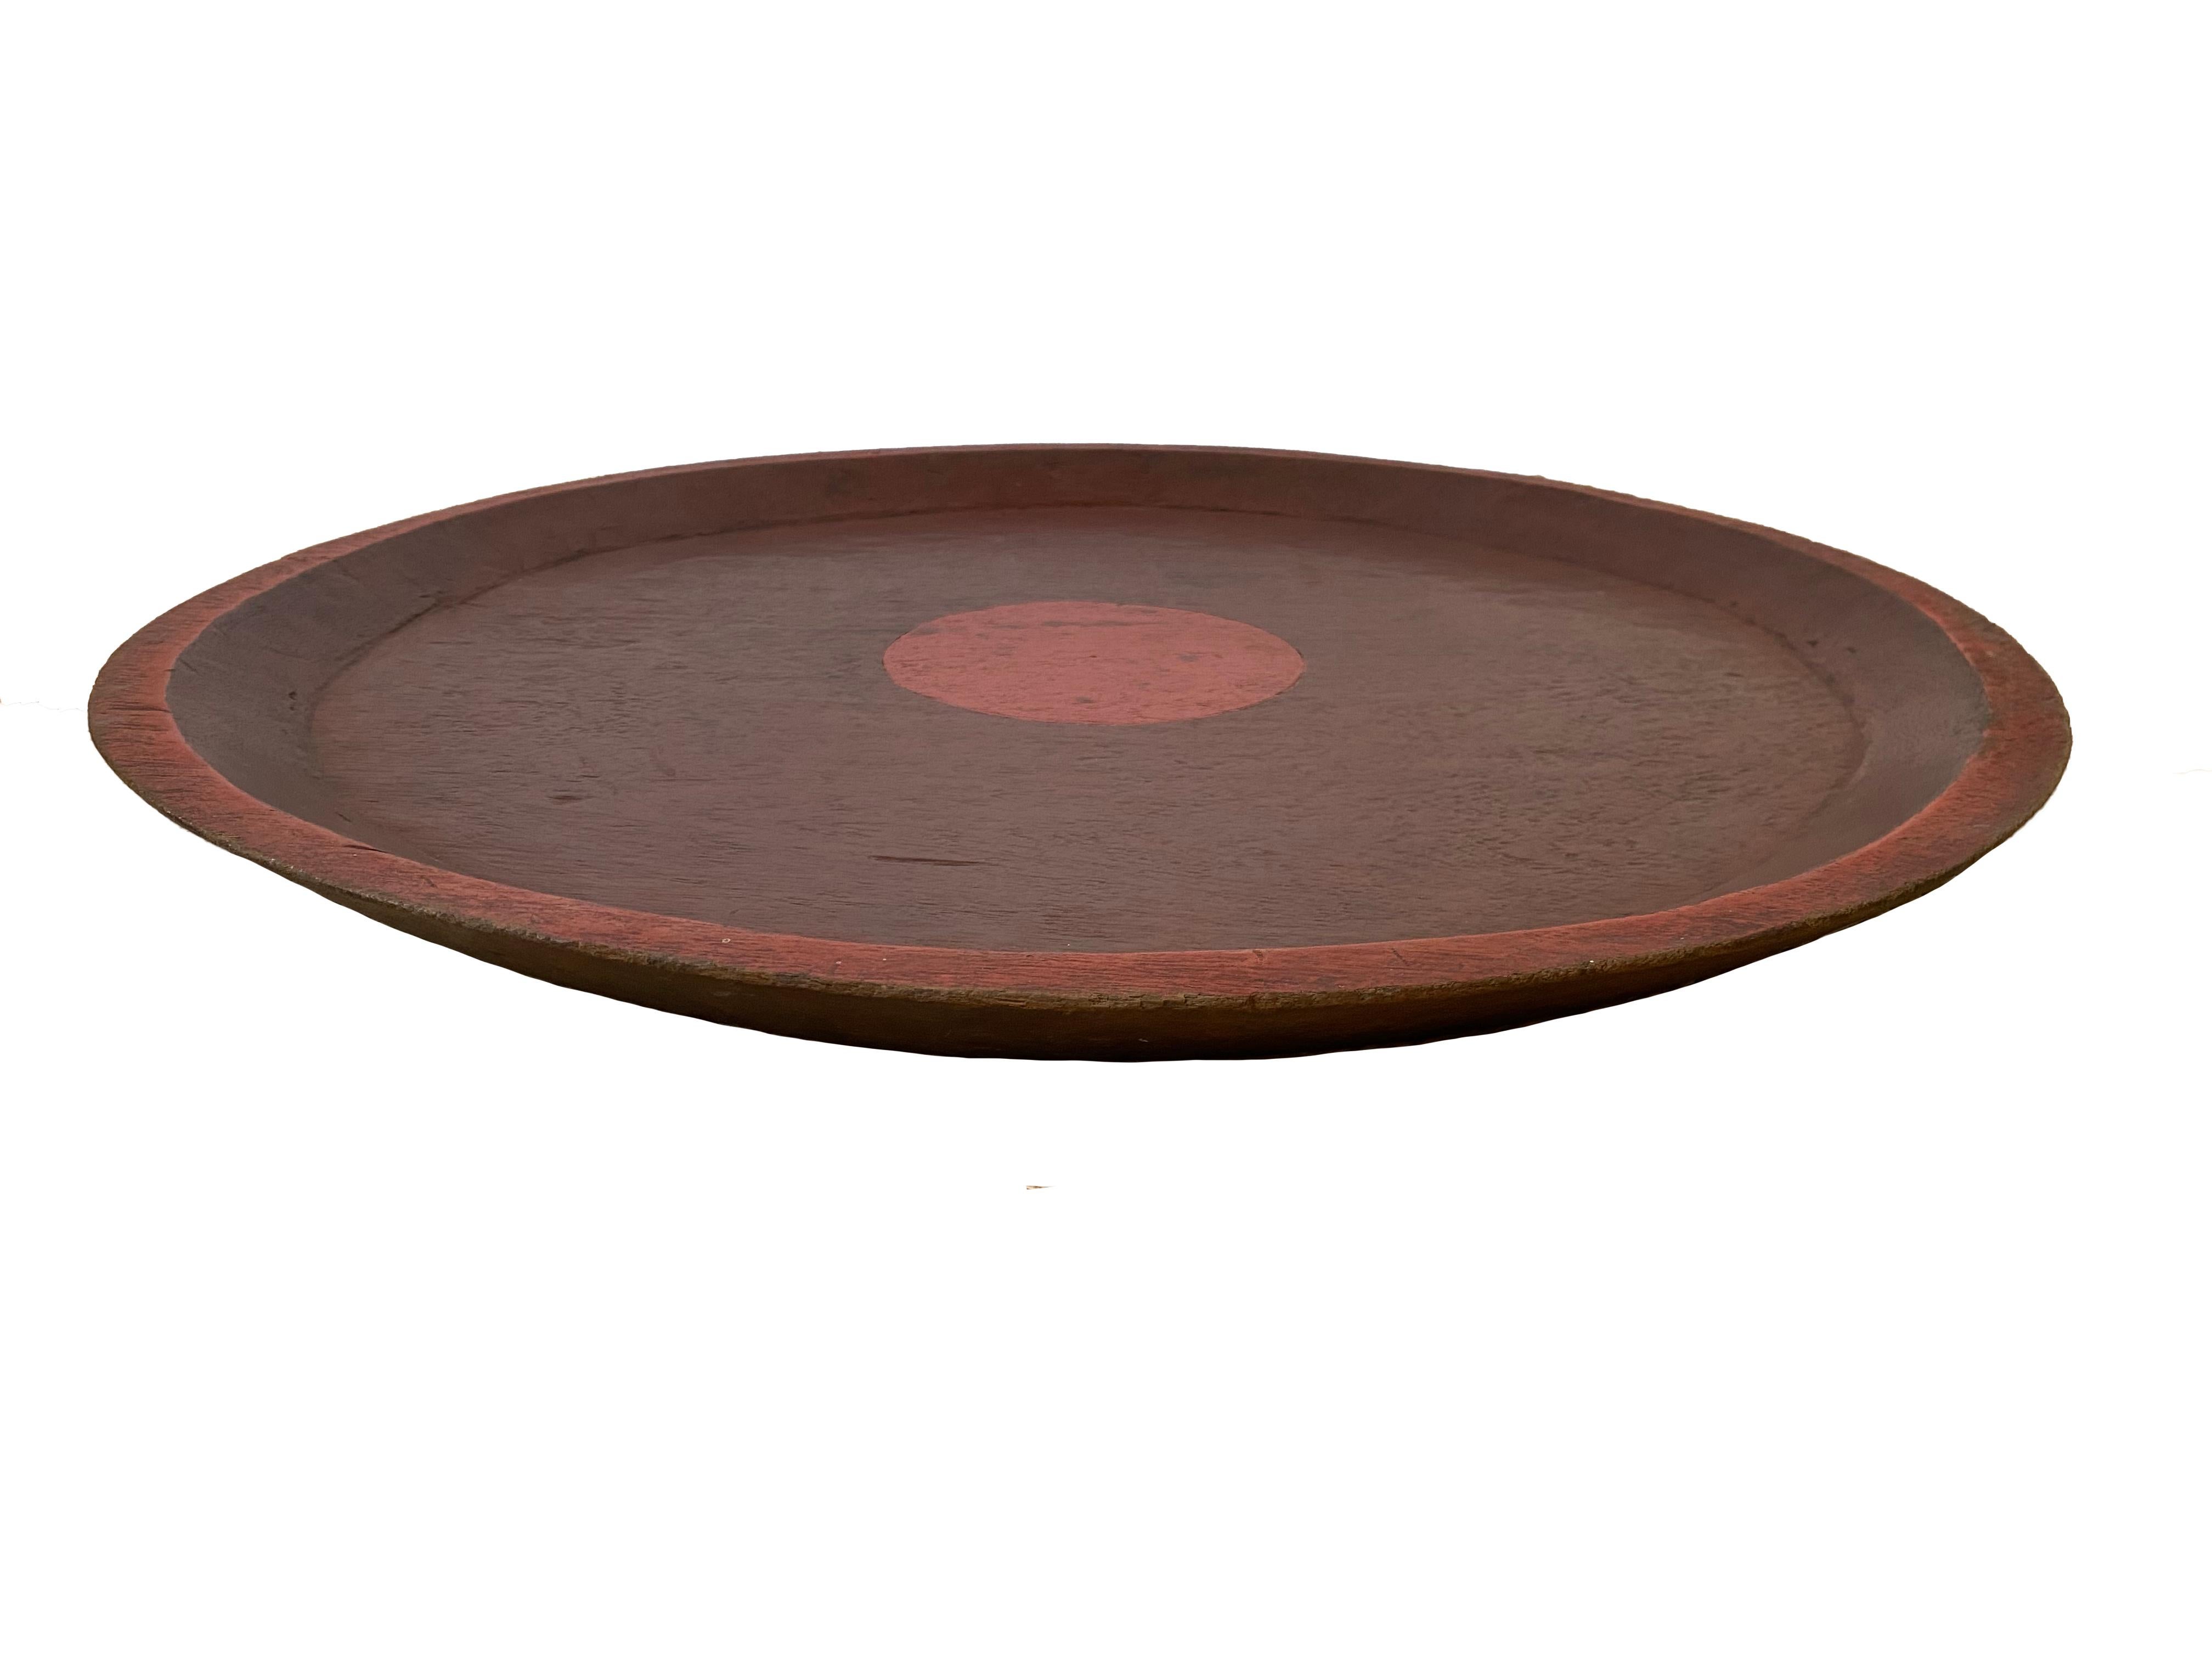 This hand-made vintage Chinese shallow tray features a red center dot and borders. This tray would be a great addition to any space or used as a serving tray.

Dimensions: Diameter 59cm x Height 3.5cm.

 